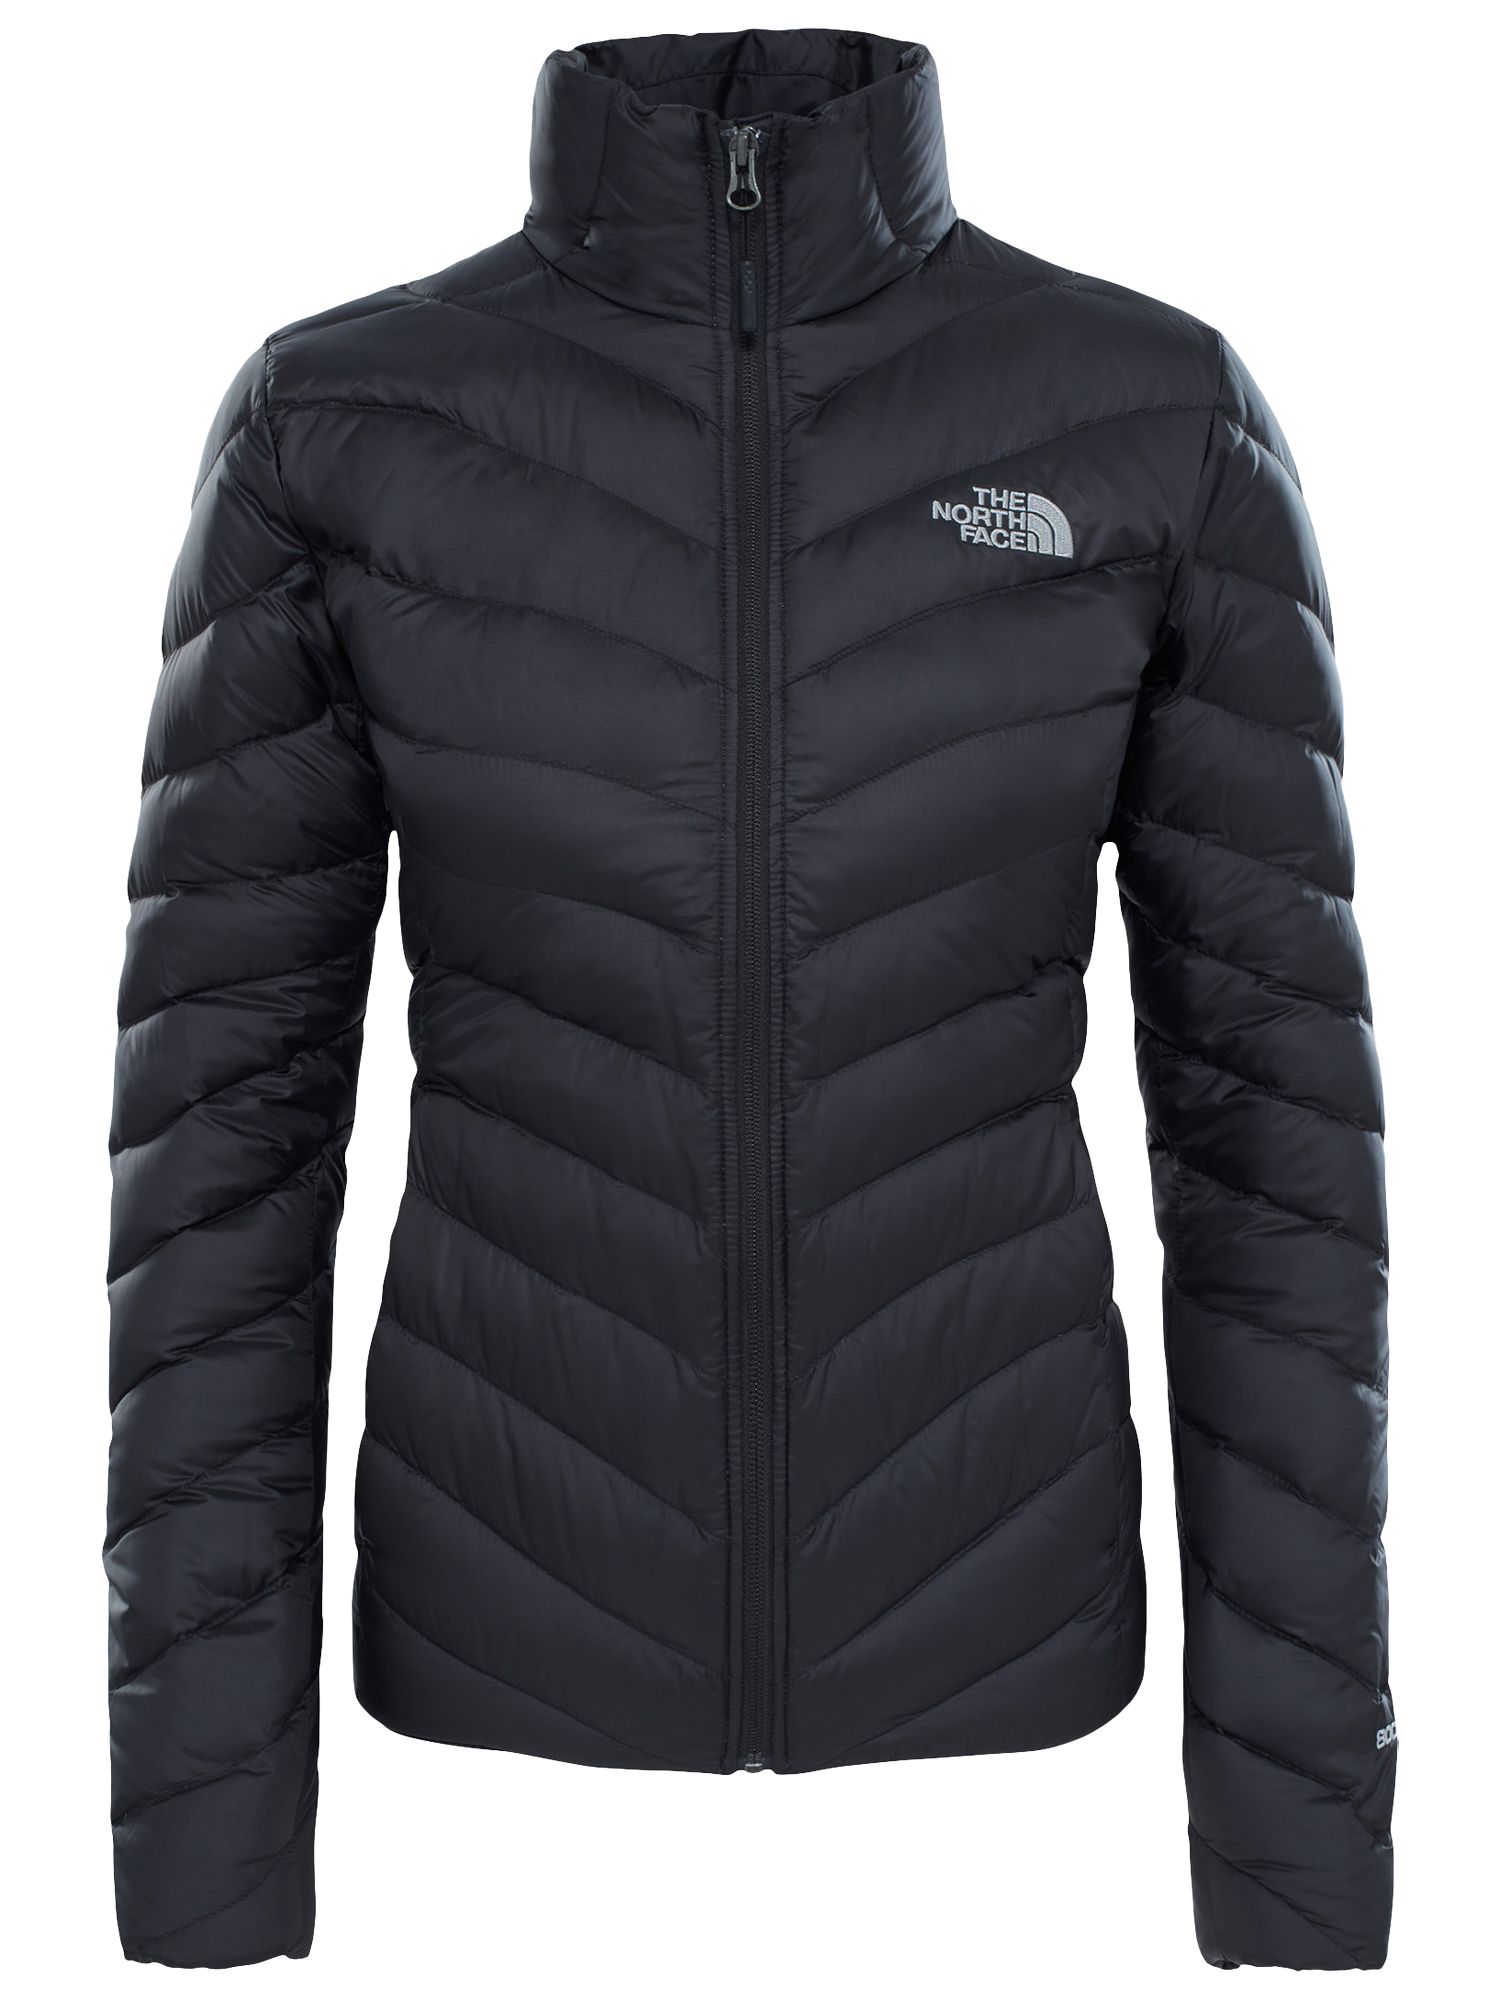 north face jackets ladies